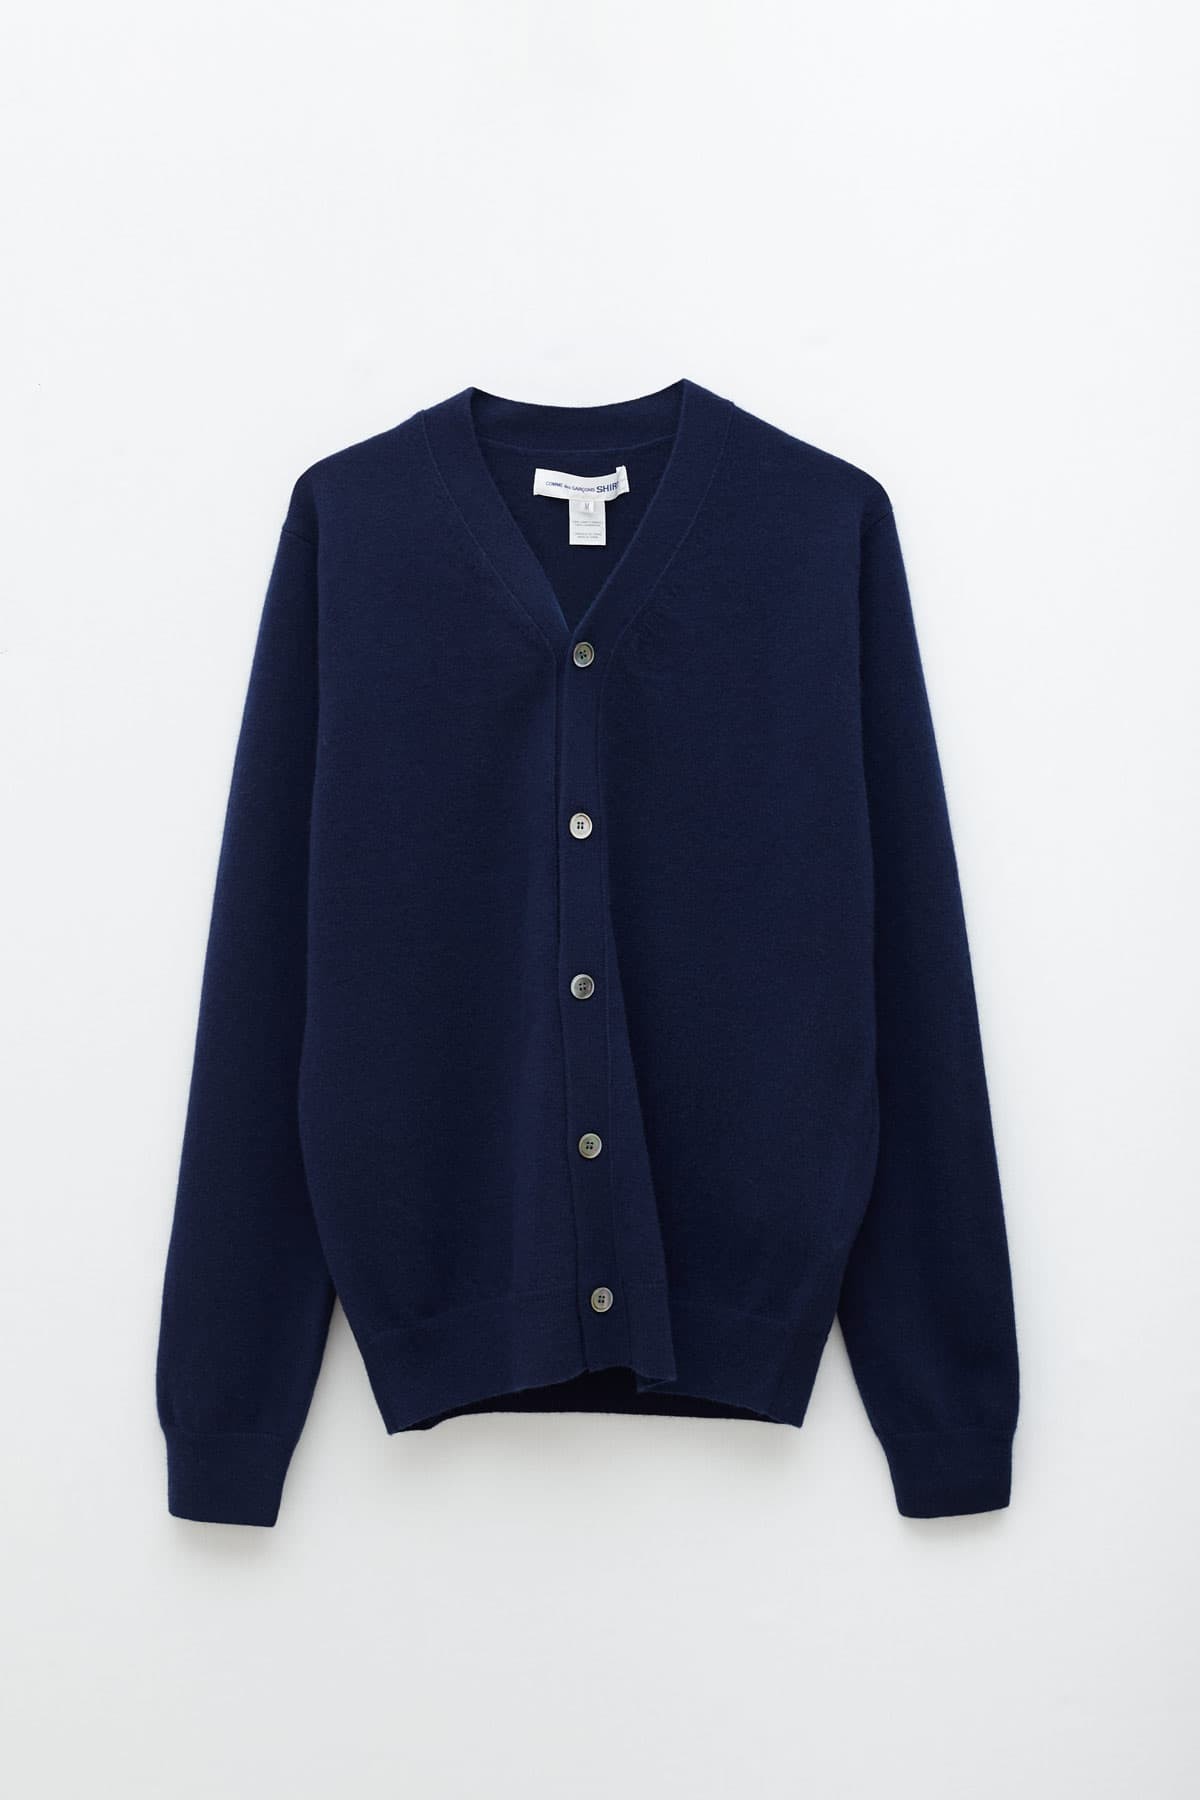 COMME DES GARCONS SHIRT FOREVER NAVY CARDIGAN IAMNUE